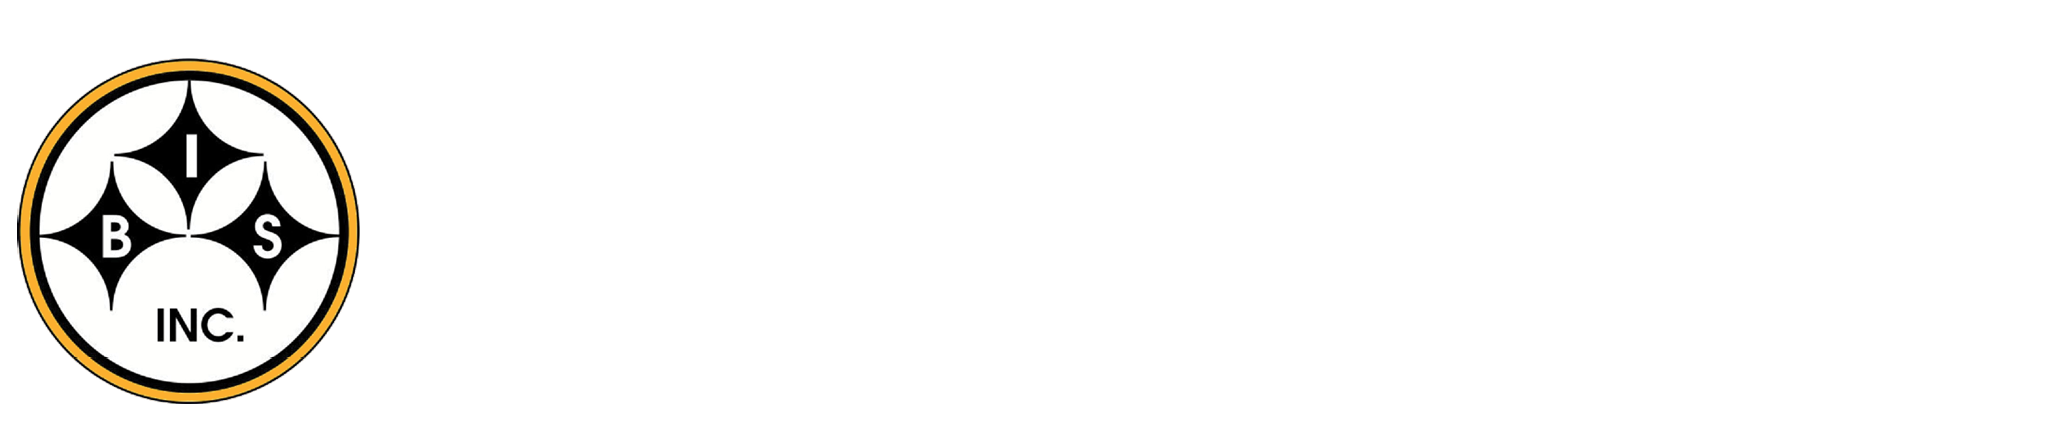 IBS INCORPORATED